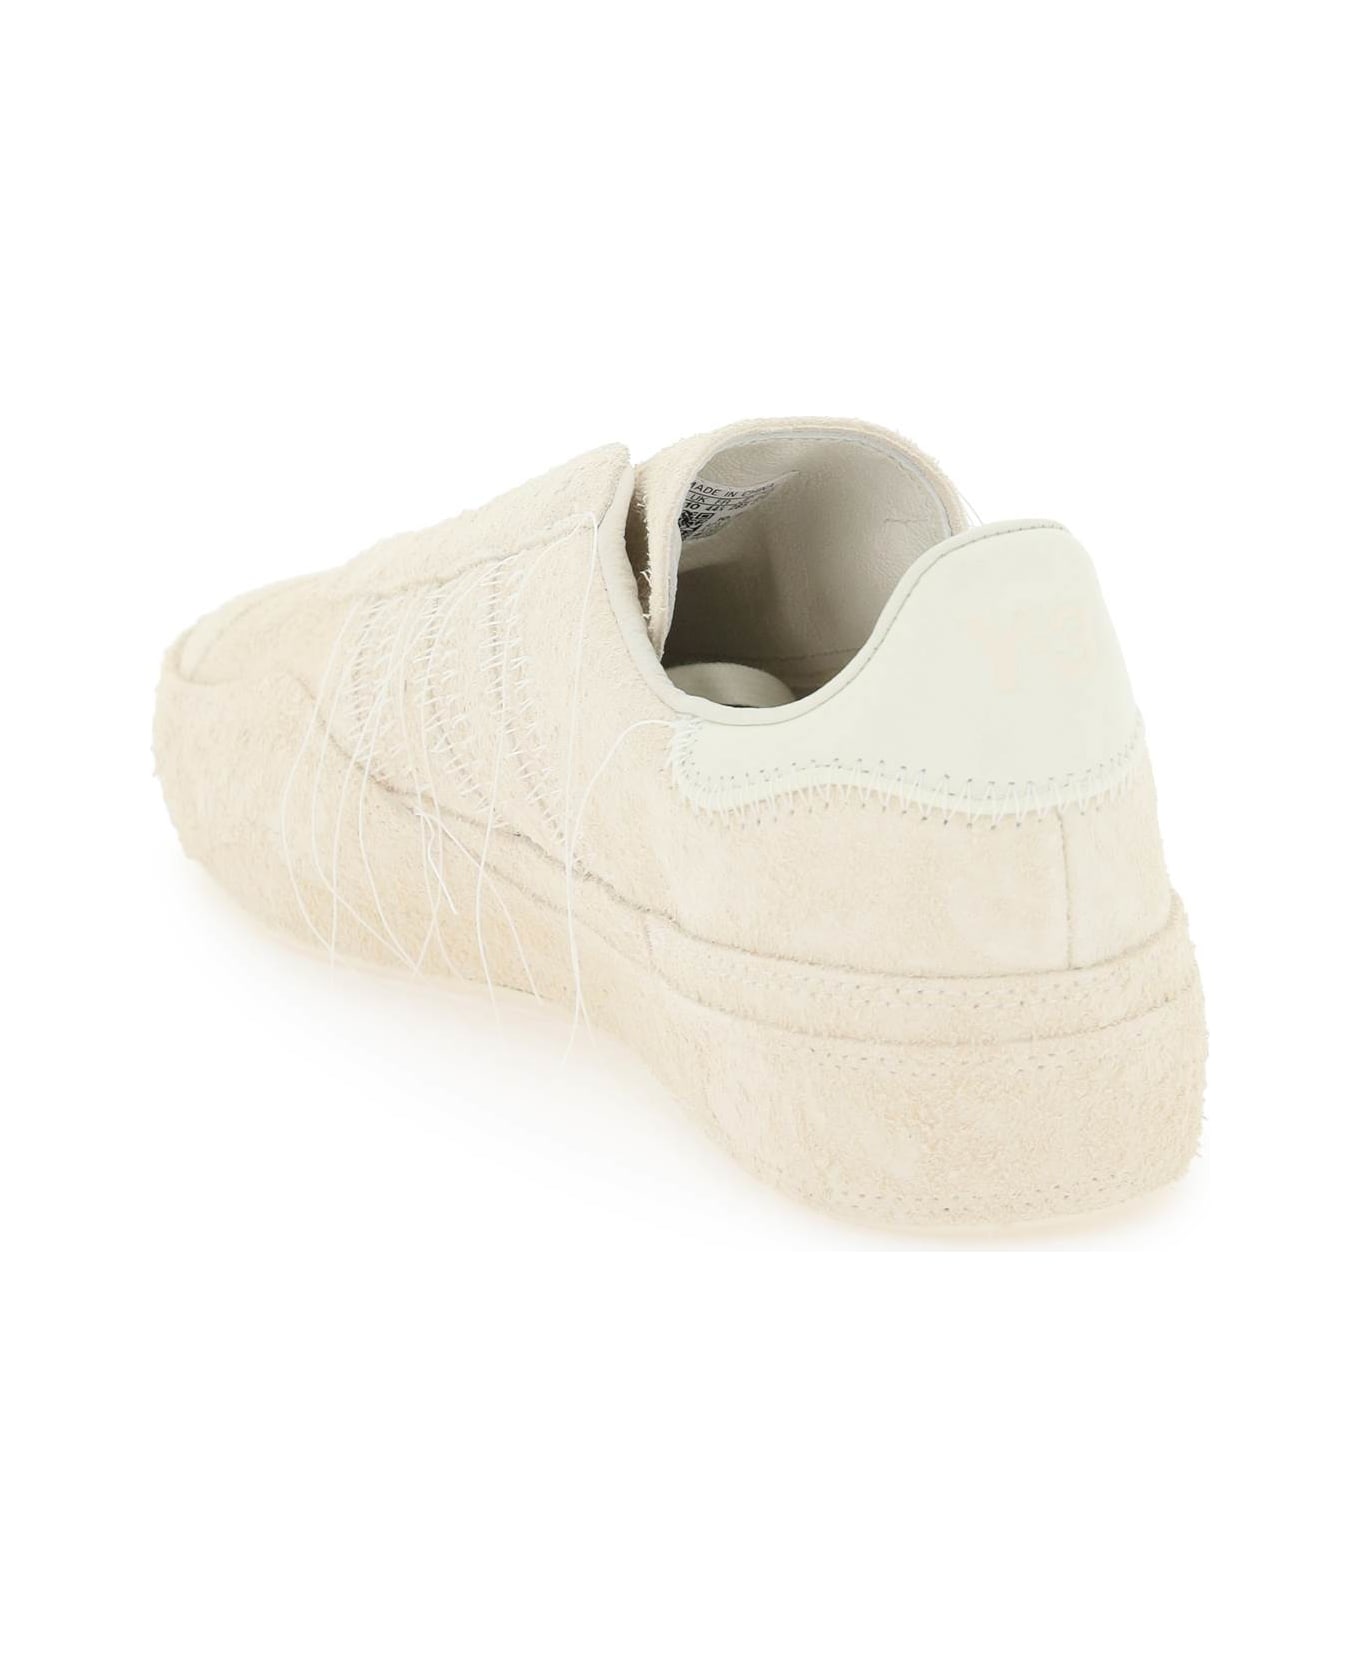 Y-3 Gazelle Ivory Suede Sneakers - White